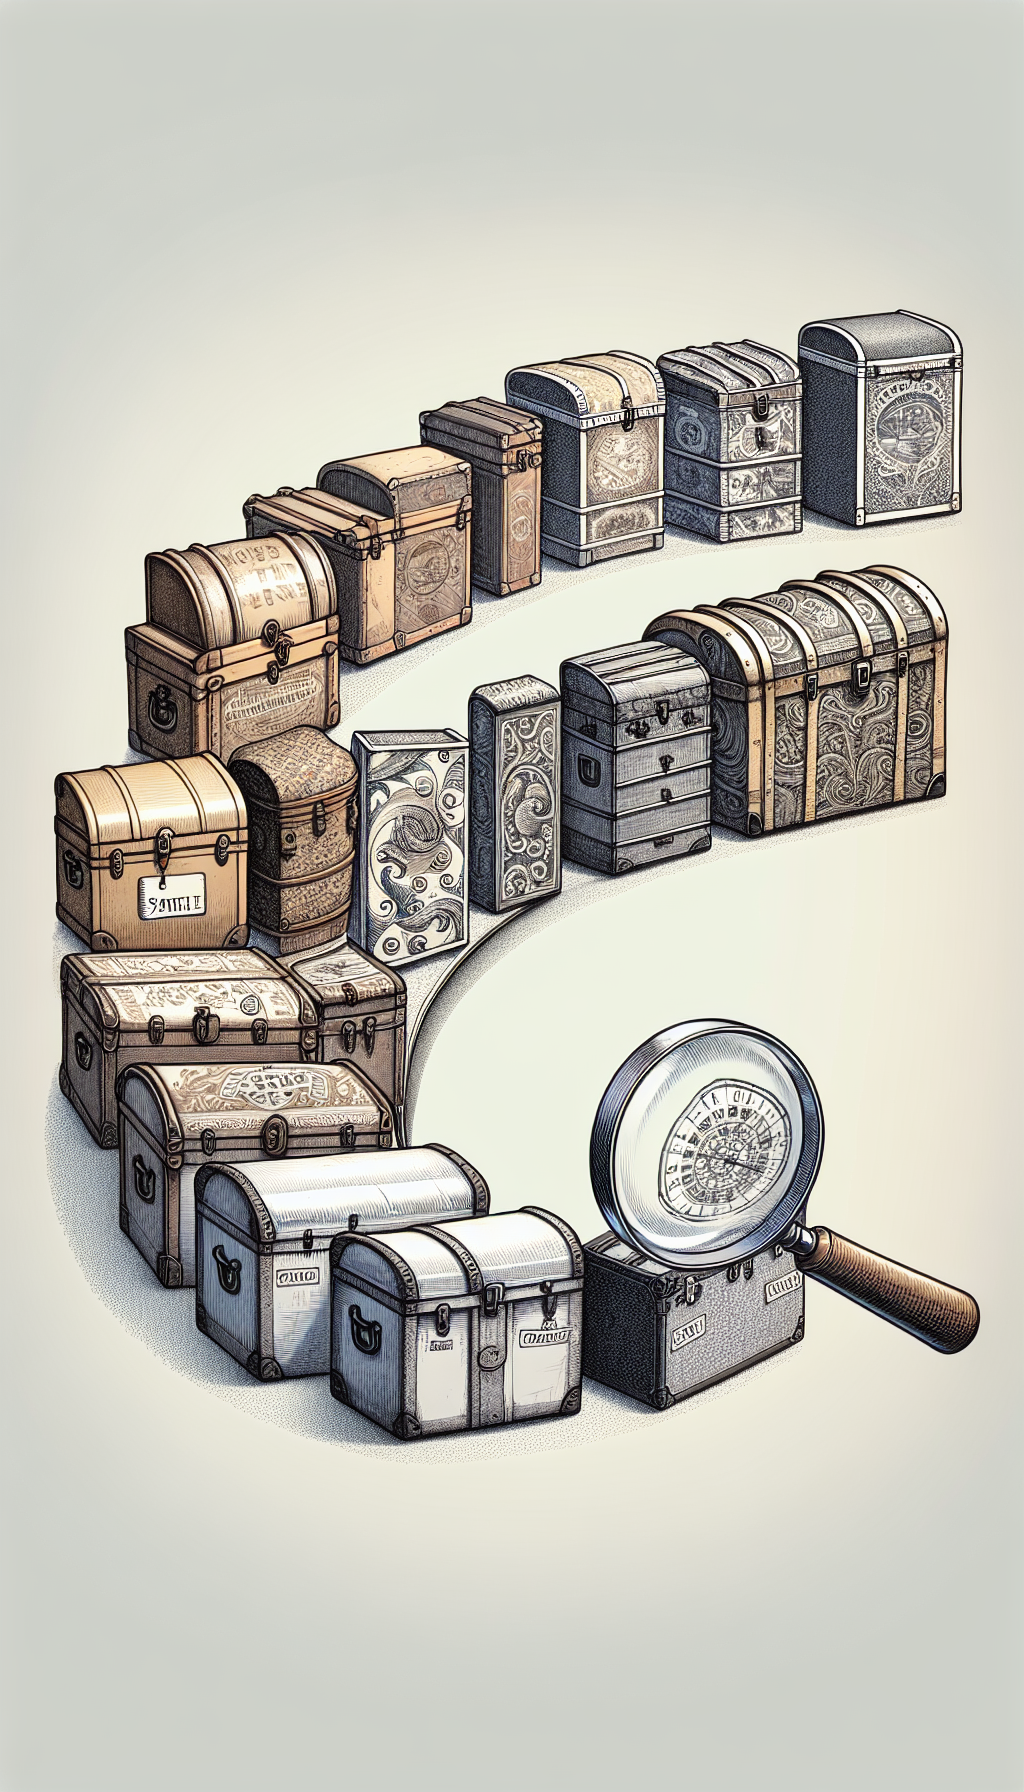 An illustration shows a series of vintage trunks morphing progressively into ornate treasure boxes along a curved timeline. Each trunk displays a distinct pattern or symbol signifying their original purpose (travel, military, steamer); a magnifying glass hovers over each, revealing a label that identifies its specific antique type (e.g., Jenny Lind, Saratoga) in varying artistic styles from realistic to abstract.